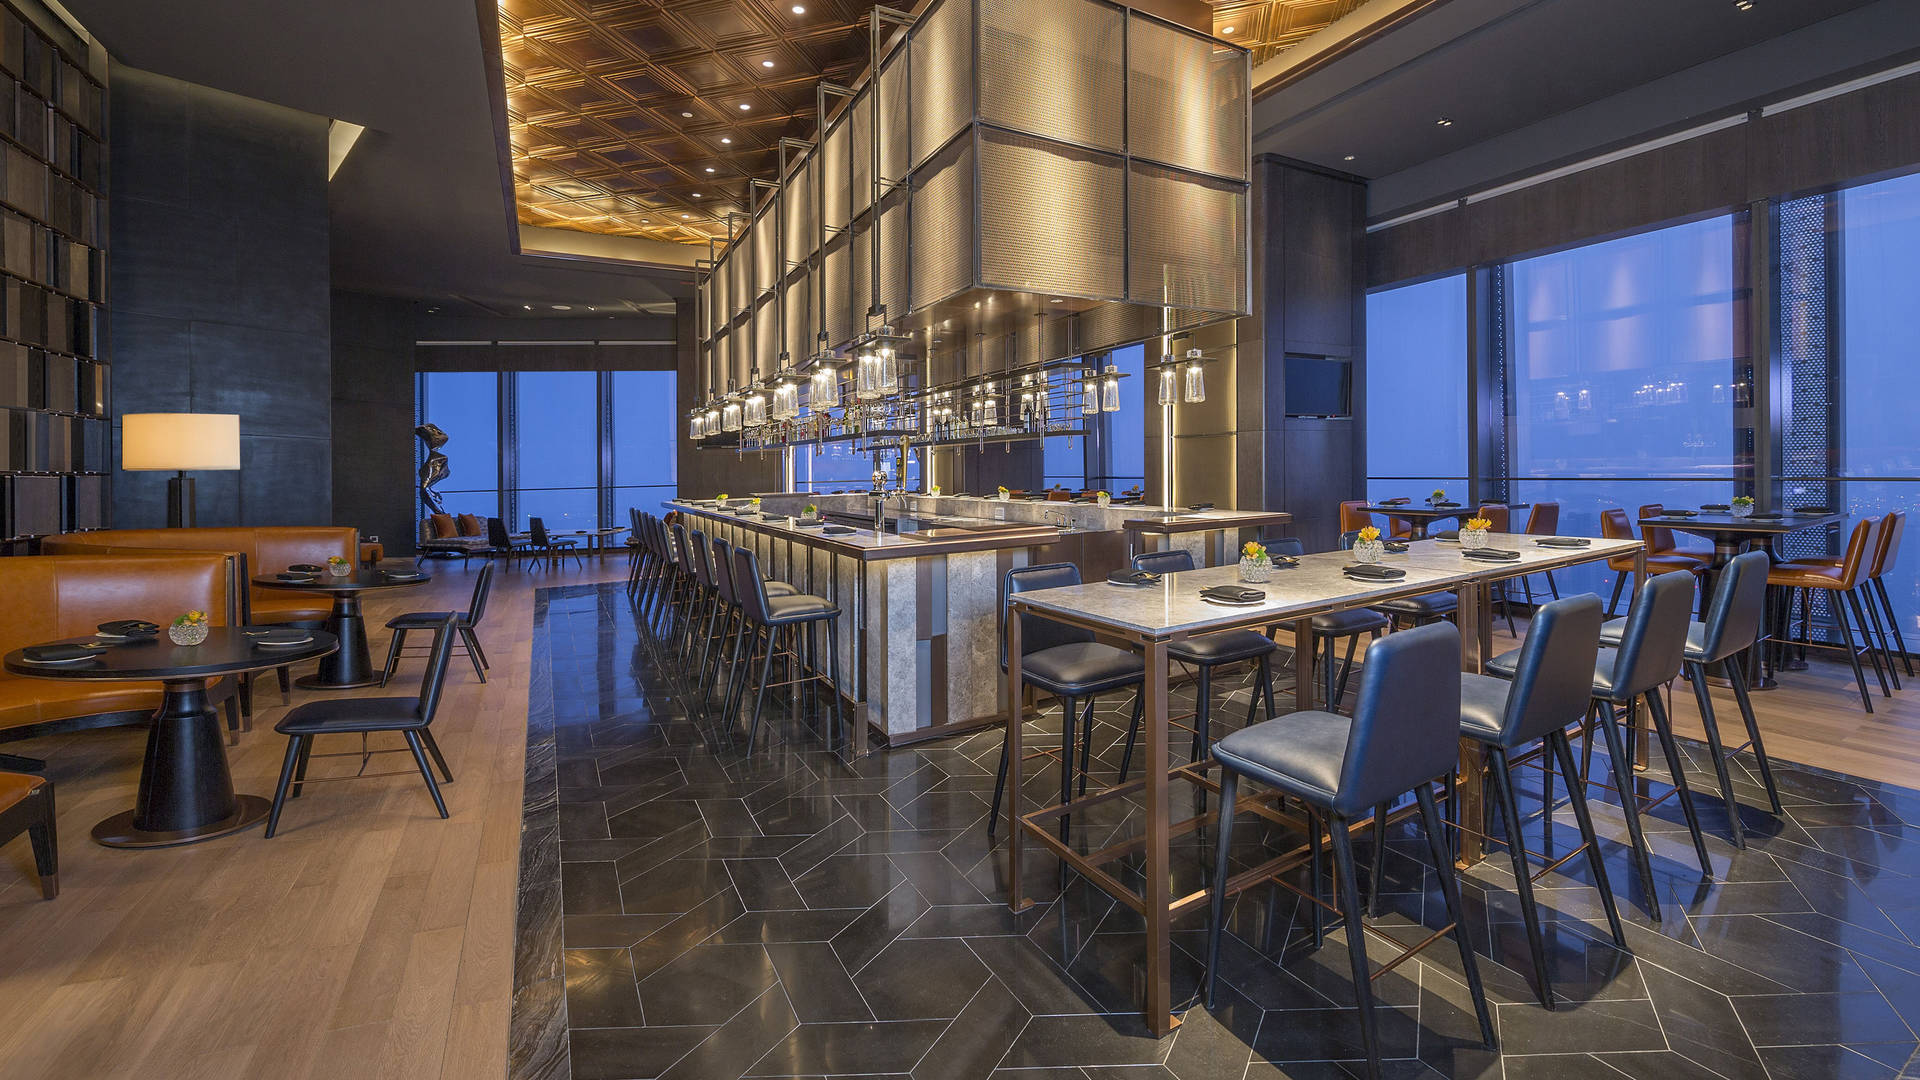 Zhuo Xian Seafood Bar with central bar and views